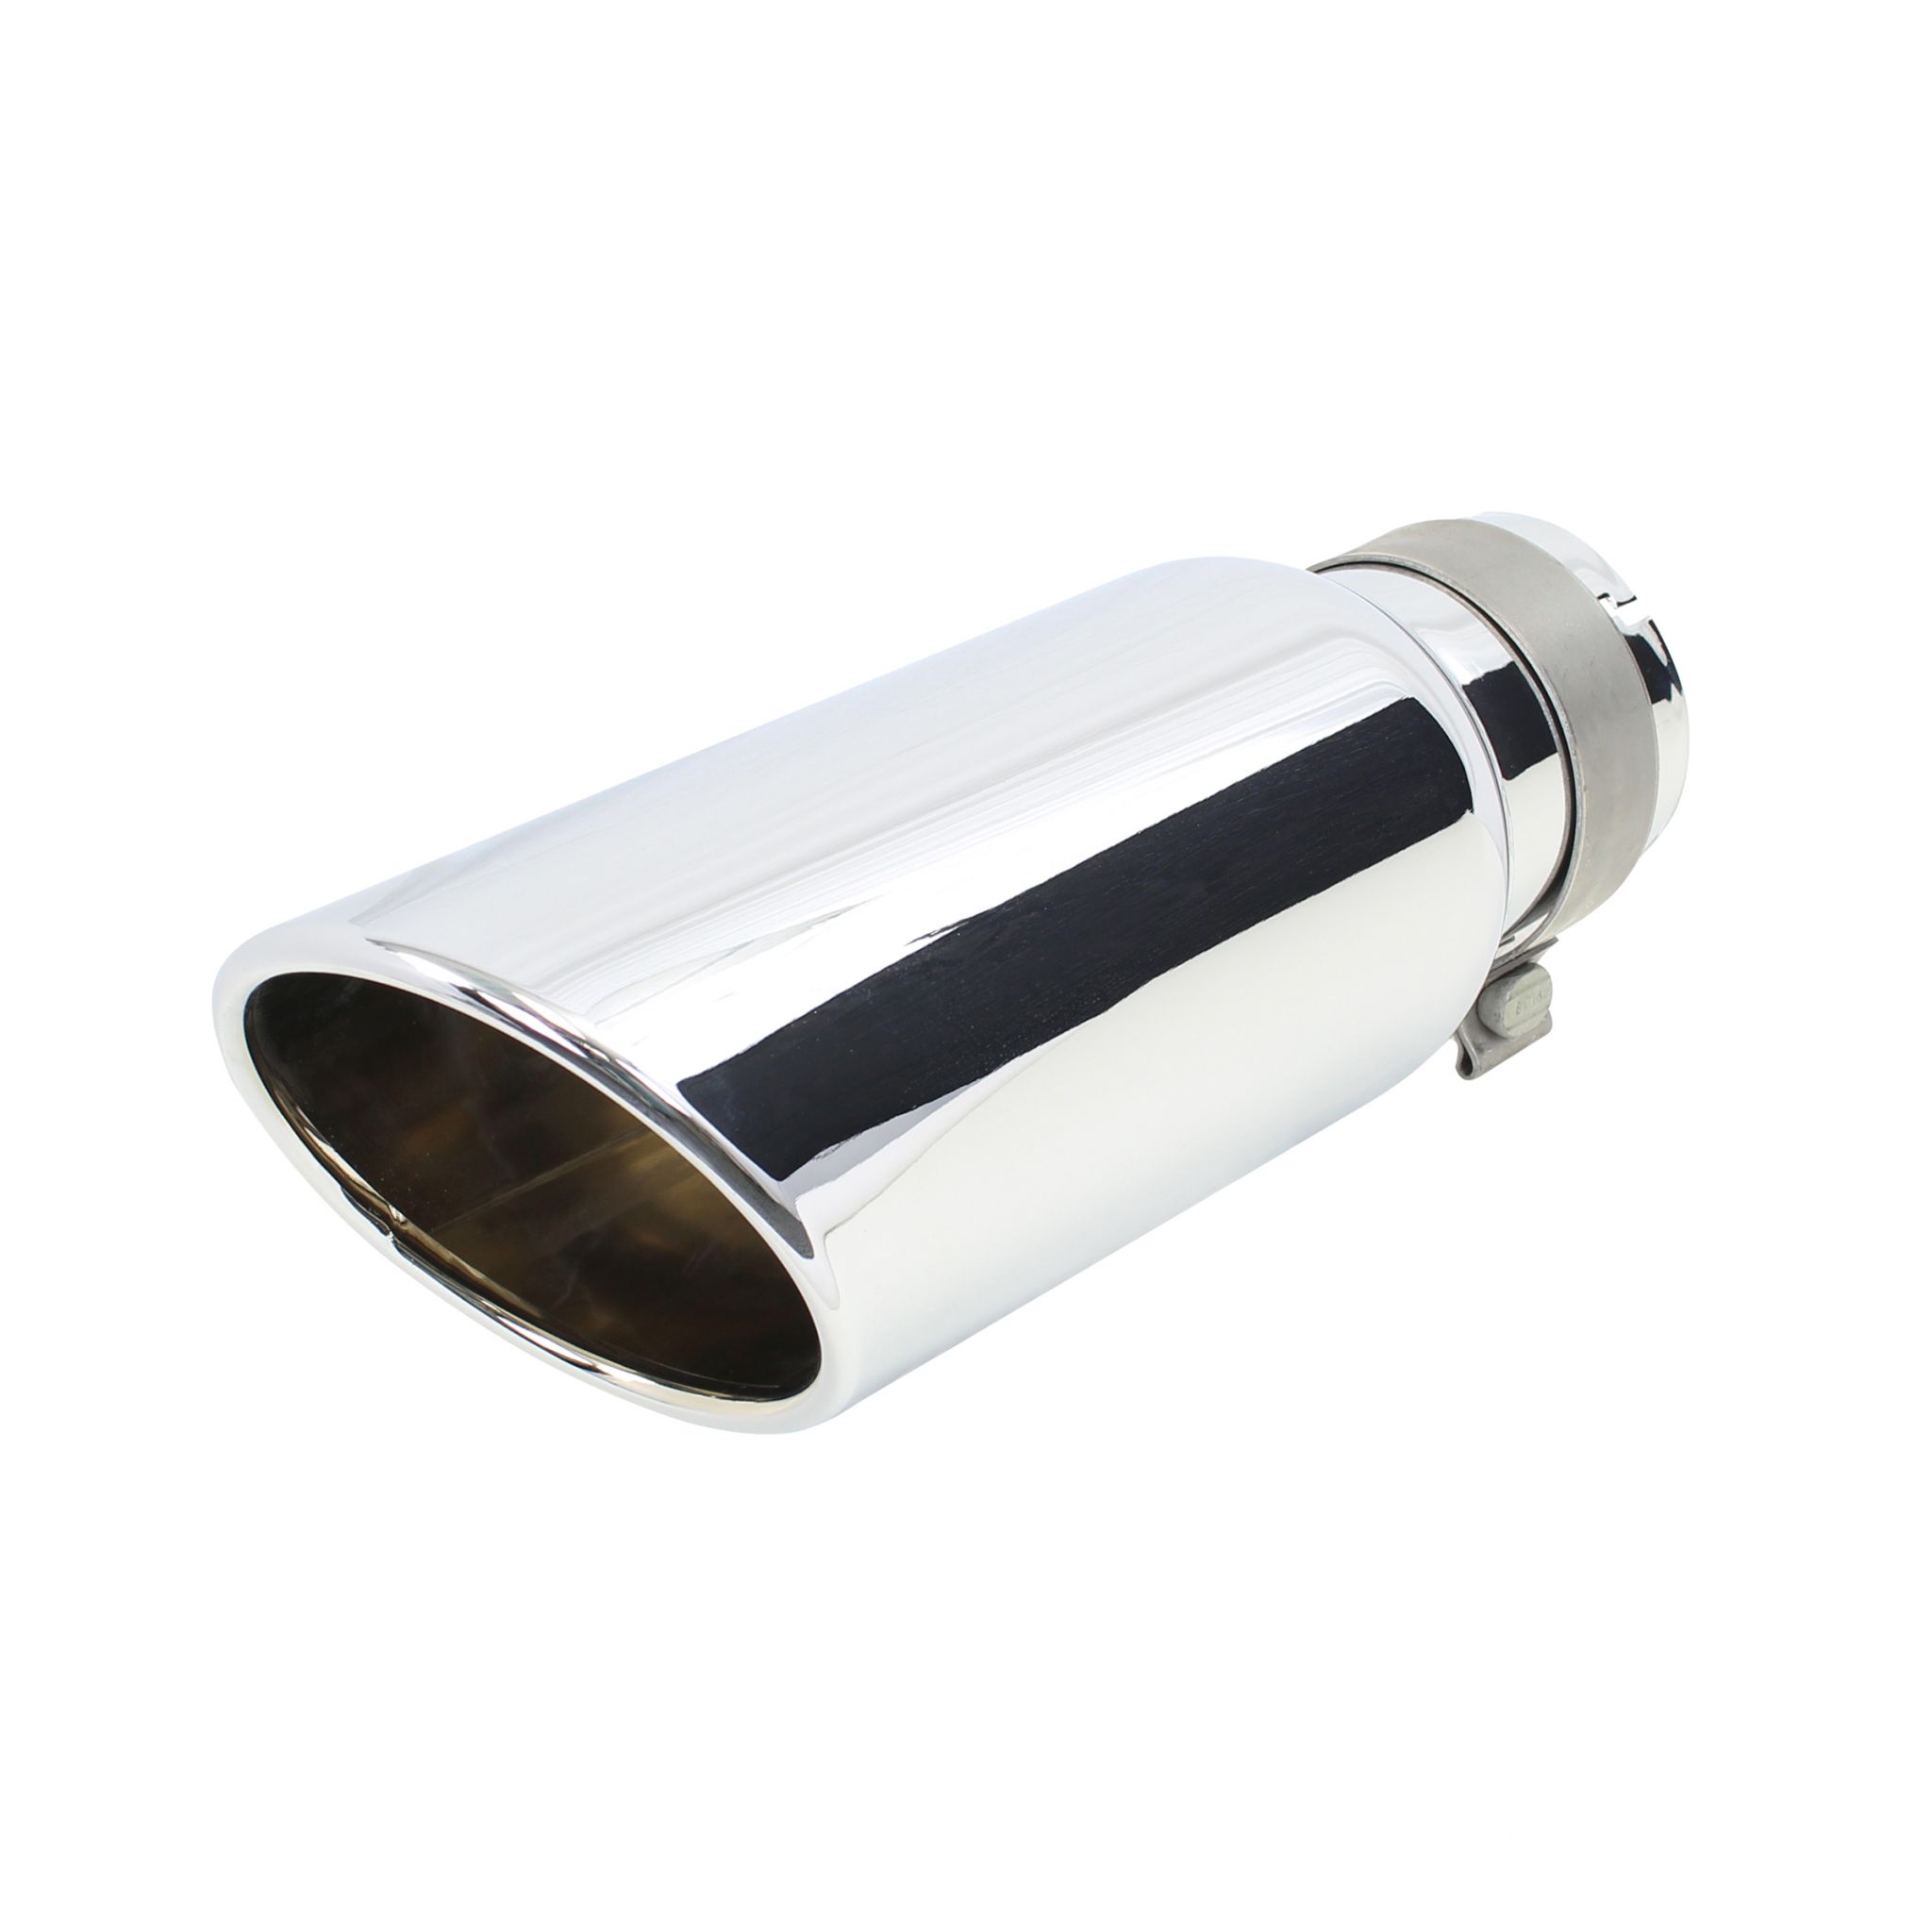 Go Rhino GRT35514 - Stainless Steel Exhaust Tip - Polished Stainless Steel